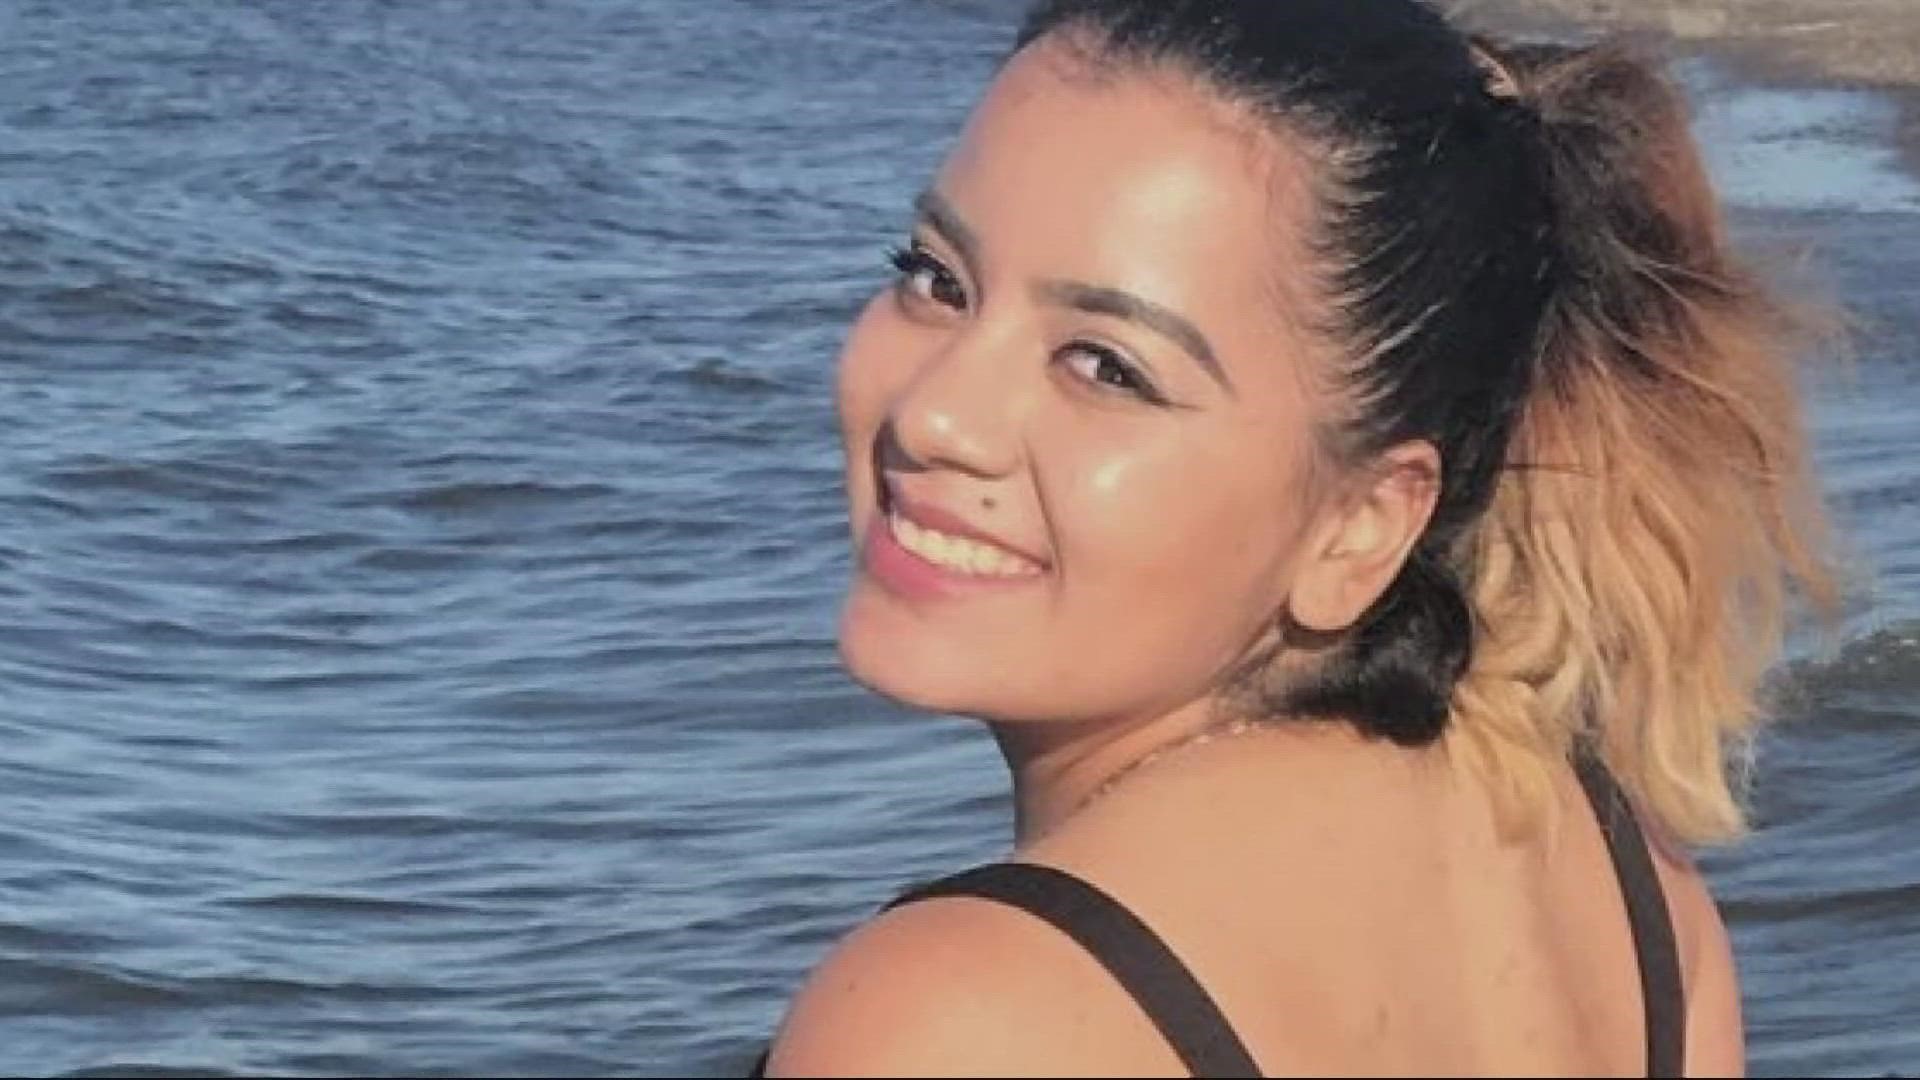 Evelin Navarro Barajas, 23, was shot and killed in Northeast Portland on June 18, 2020. Crimestoppers recently highlighted the case, looking for tips